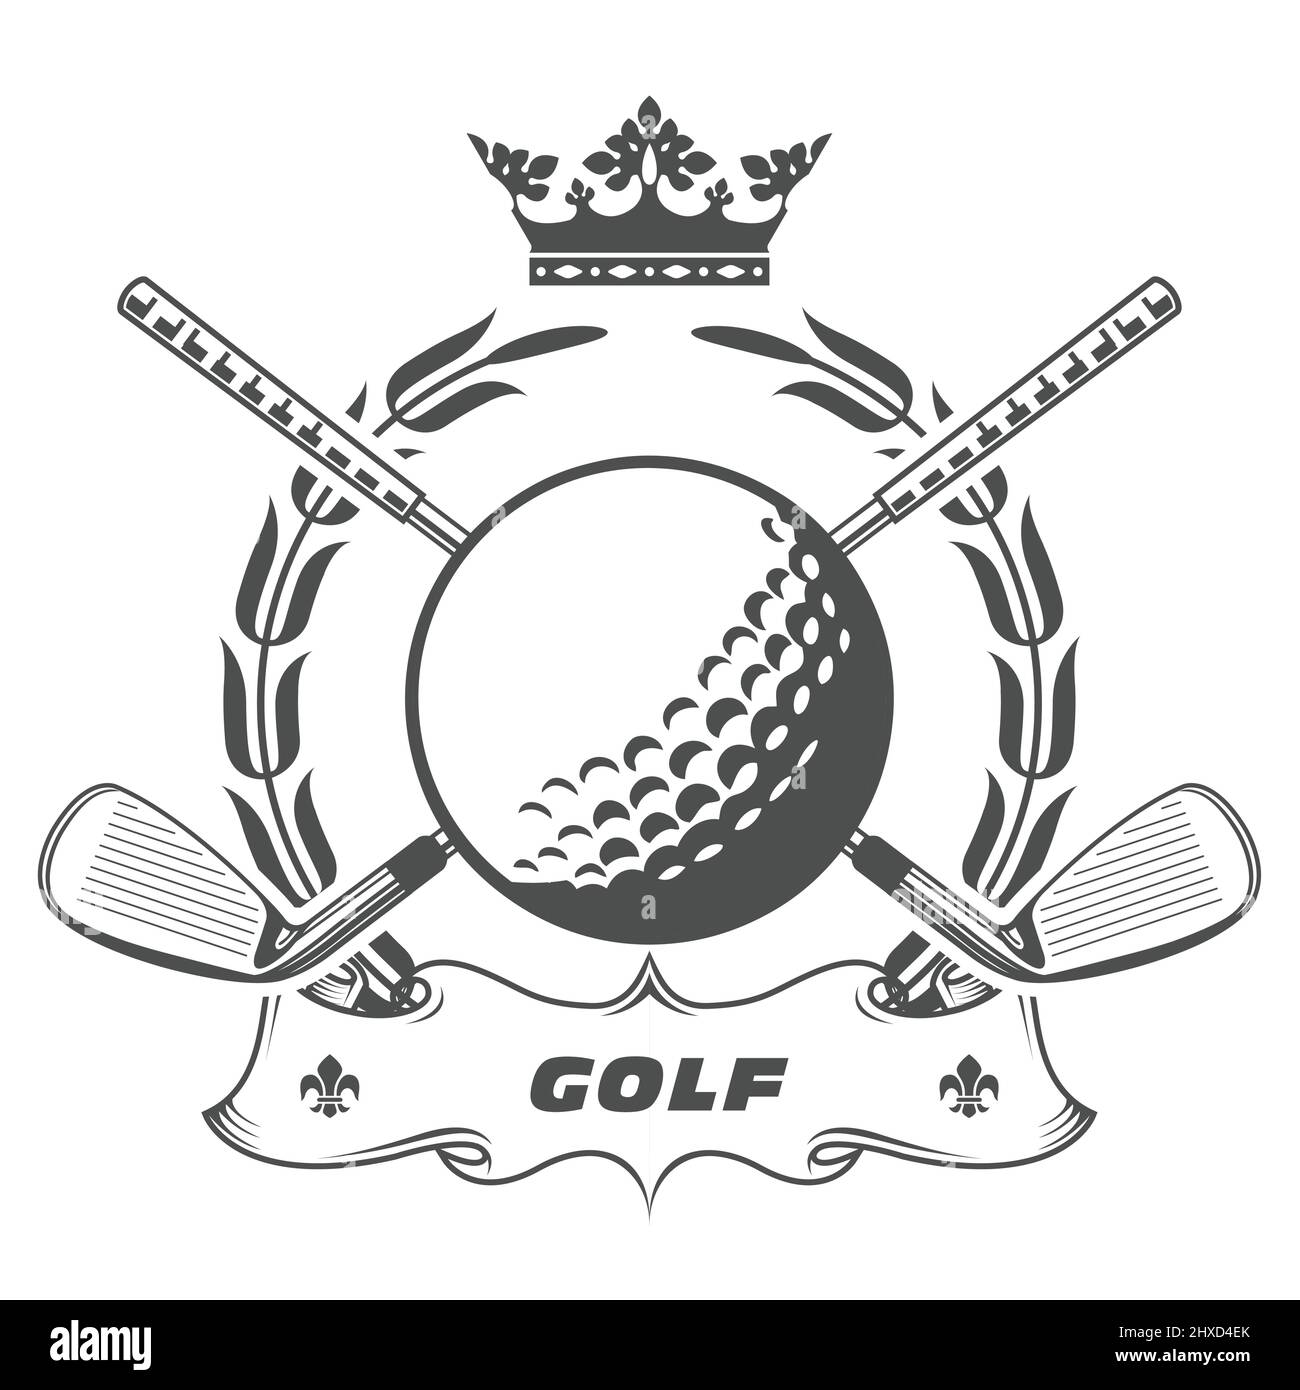 Golf club emblem, crossed golf clubs and ball, laurel wreath and banner, award, vector Stock Vector